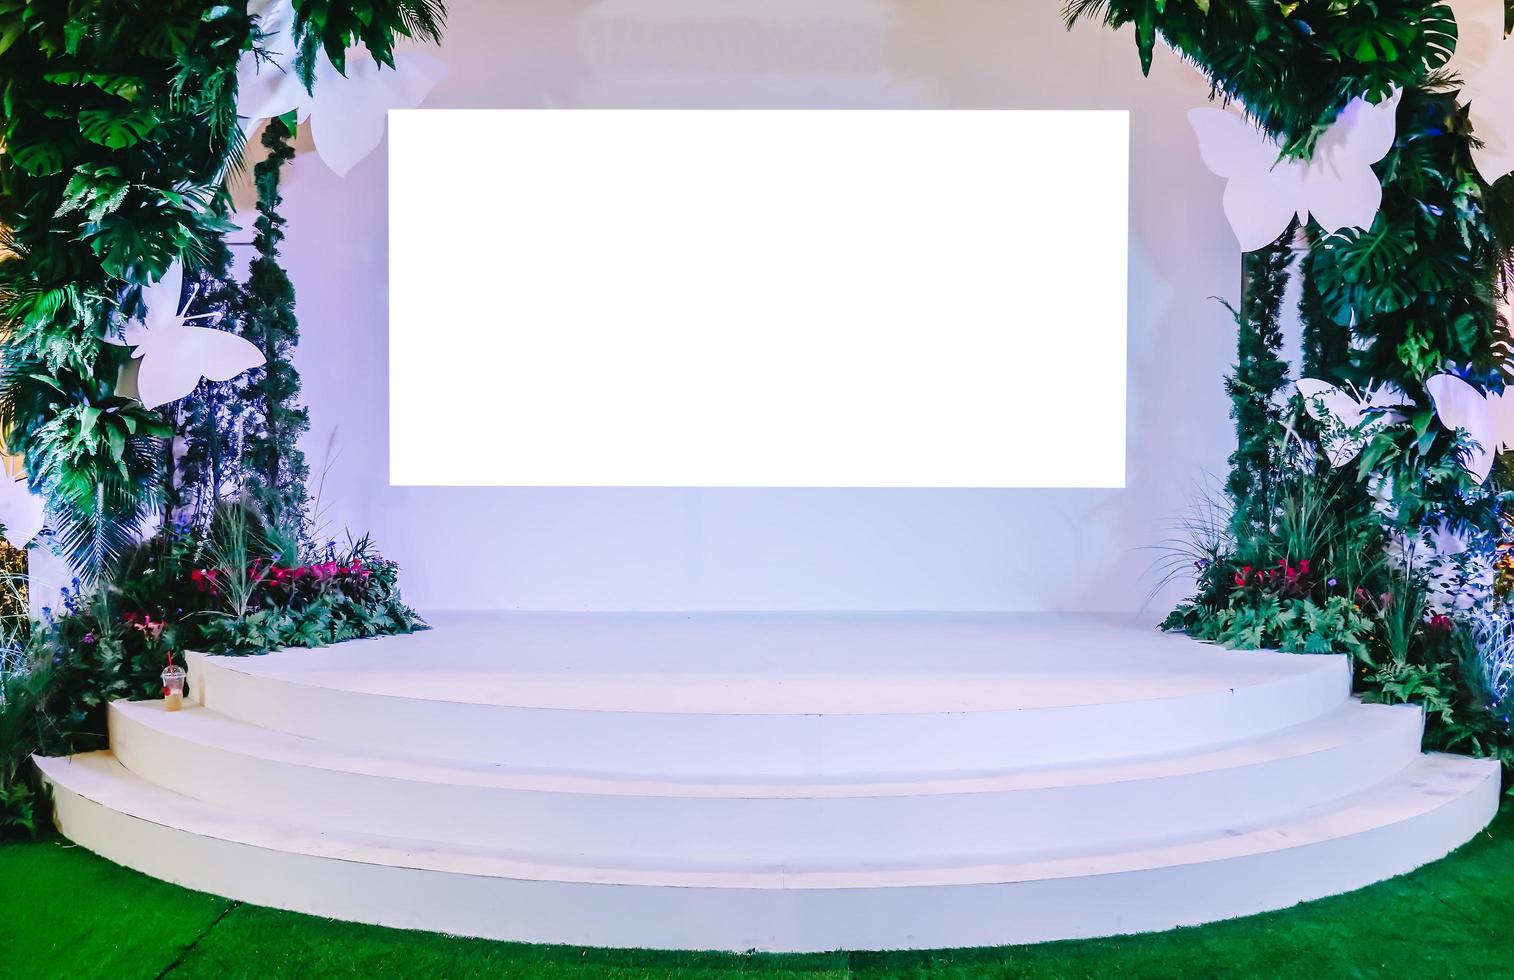 Beautiful wedding backdrop and decorations flowers indoor, backdrop and blank background for input text and symbol photo